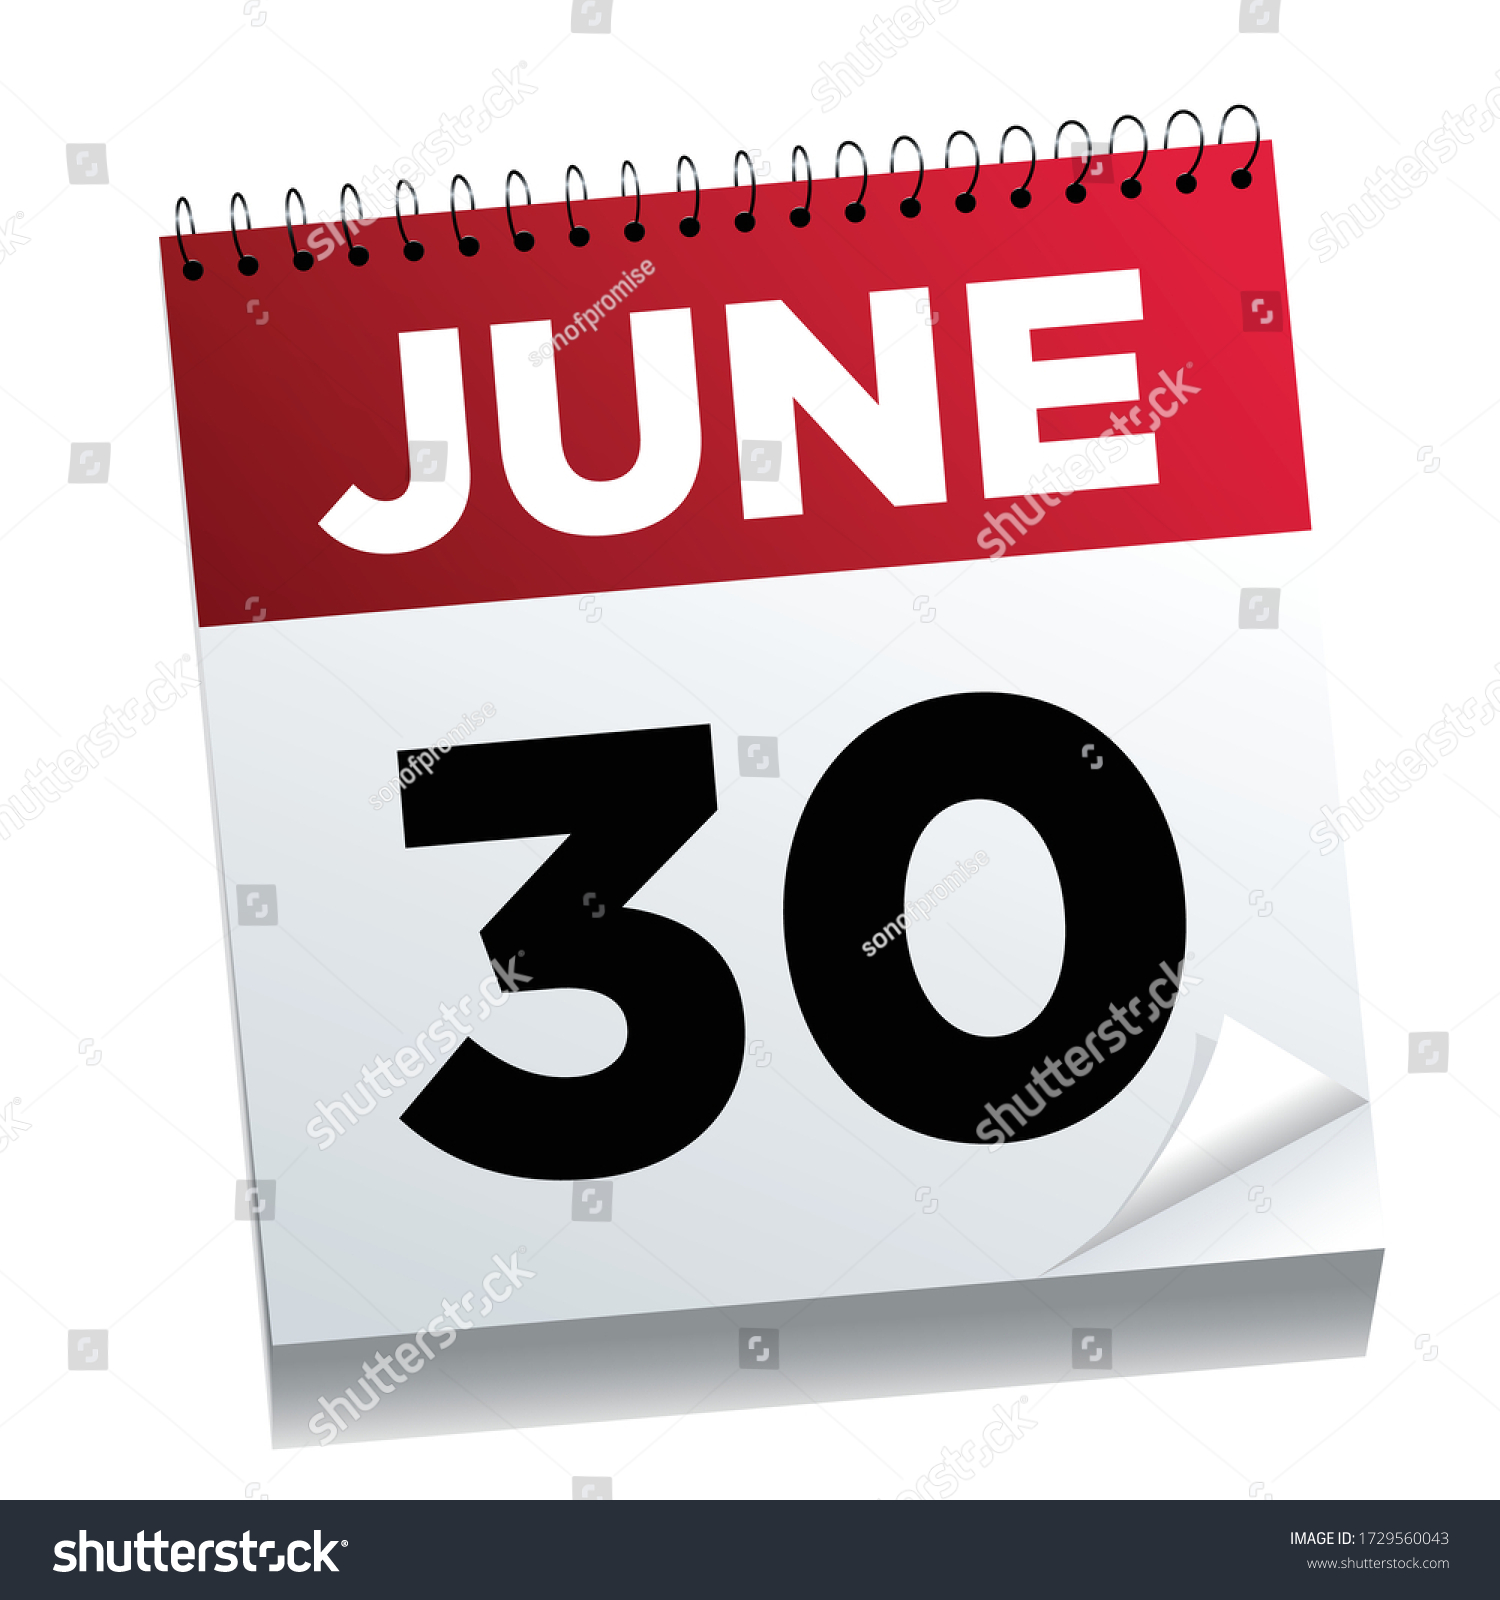 June 30th on a calendar page illustrated Royalty Free Stock Vector